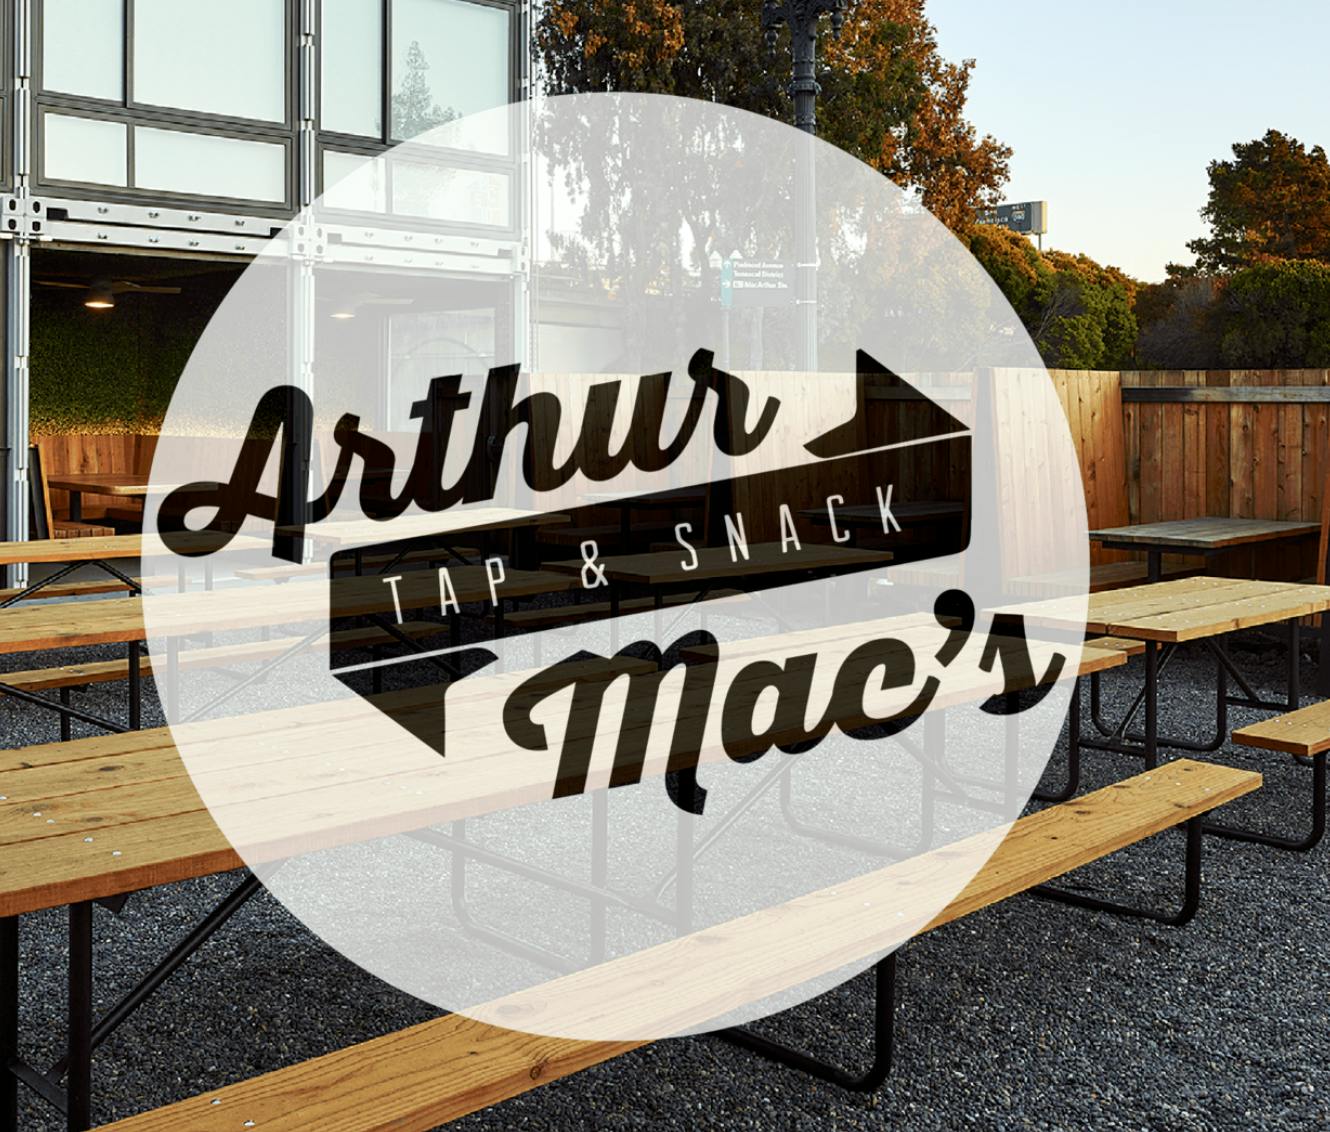 BAWiP Happy Hour: Arthur Mac's Tap and Snacks